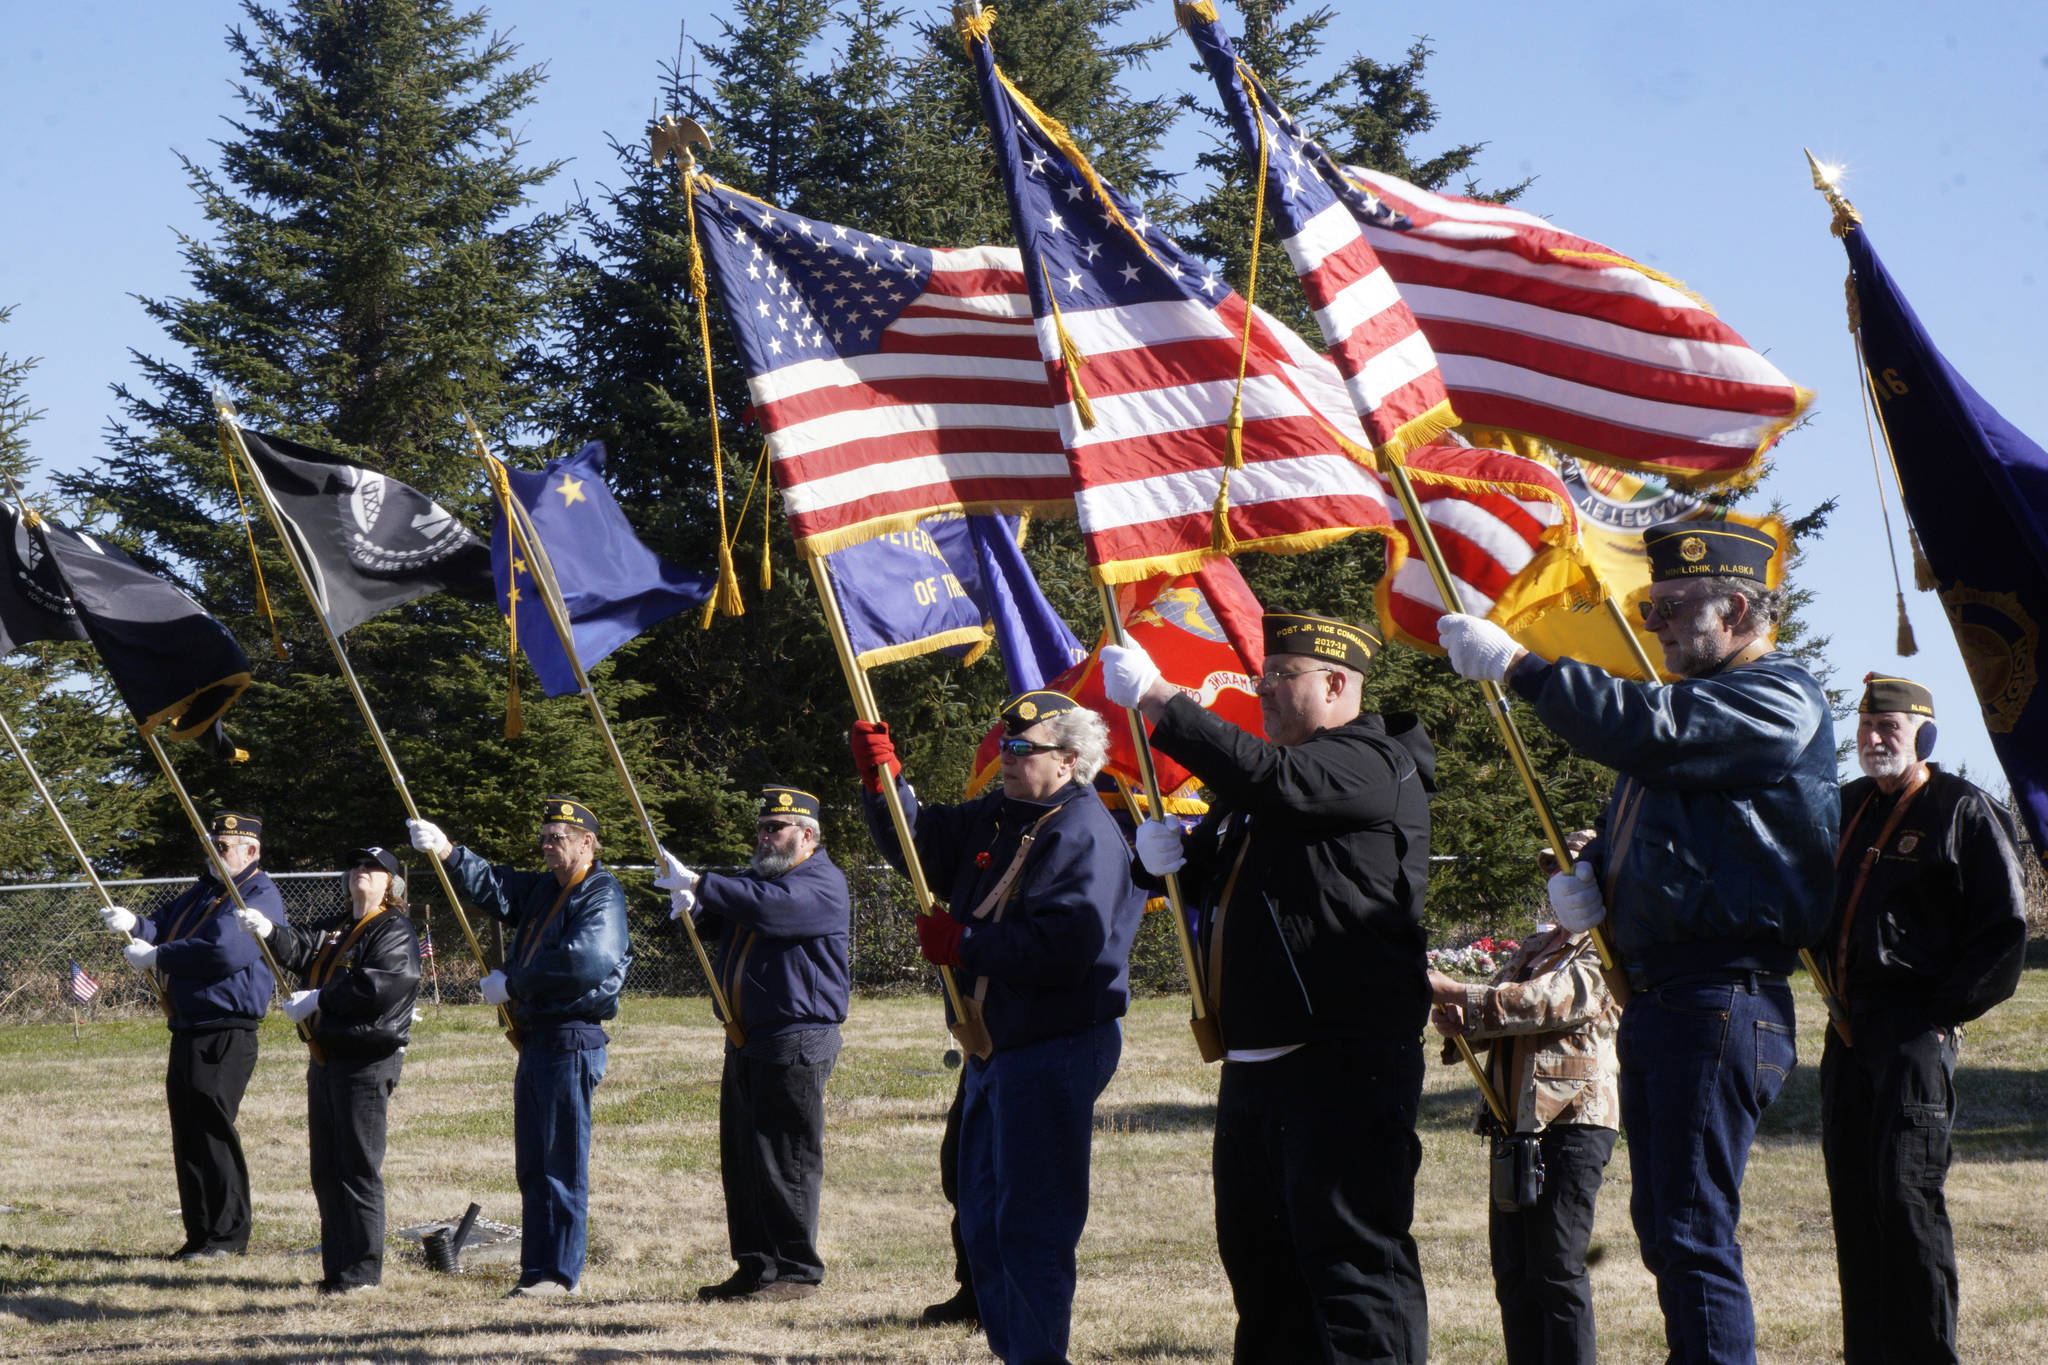 Members of the American Legion and the Veterans of Foreign Wars hold flags on Memorial Day, May 28, 2018, at Hickerson Memorial Cemetery, Homer, for services there. (Photo by Michael Armstrong / Homer News)